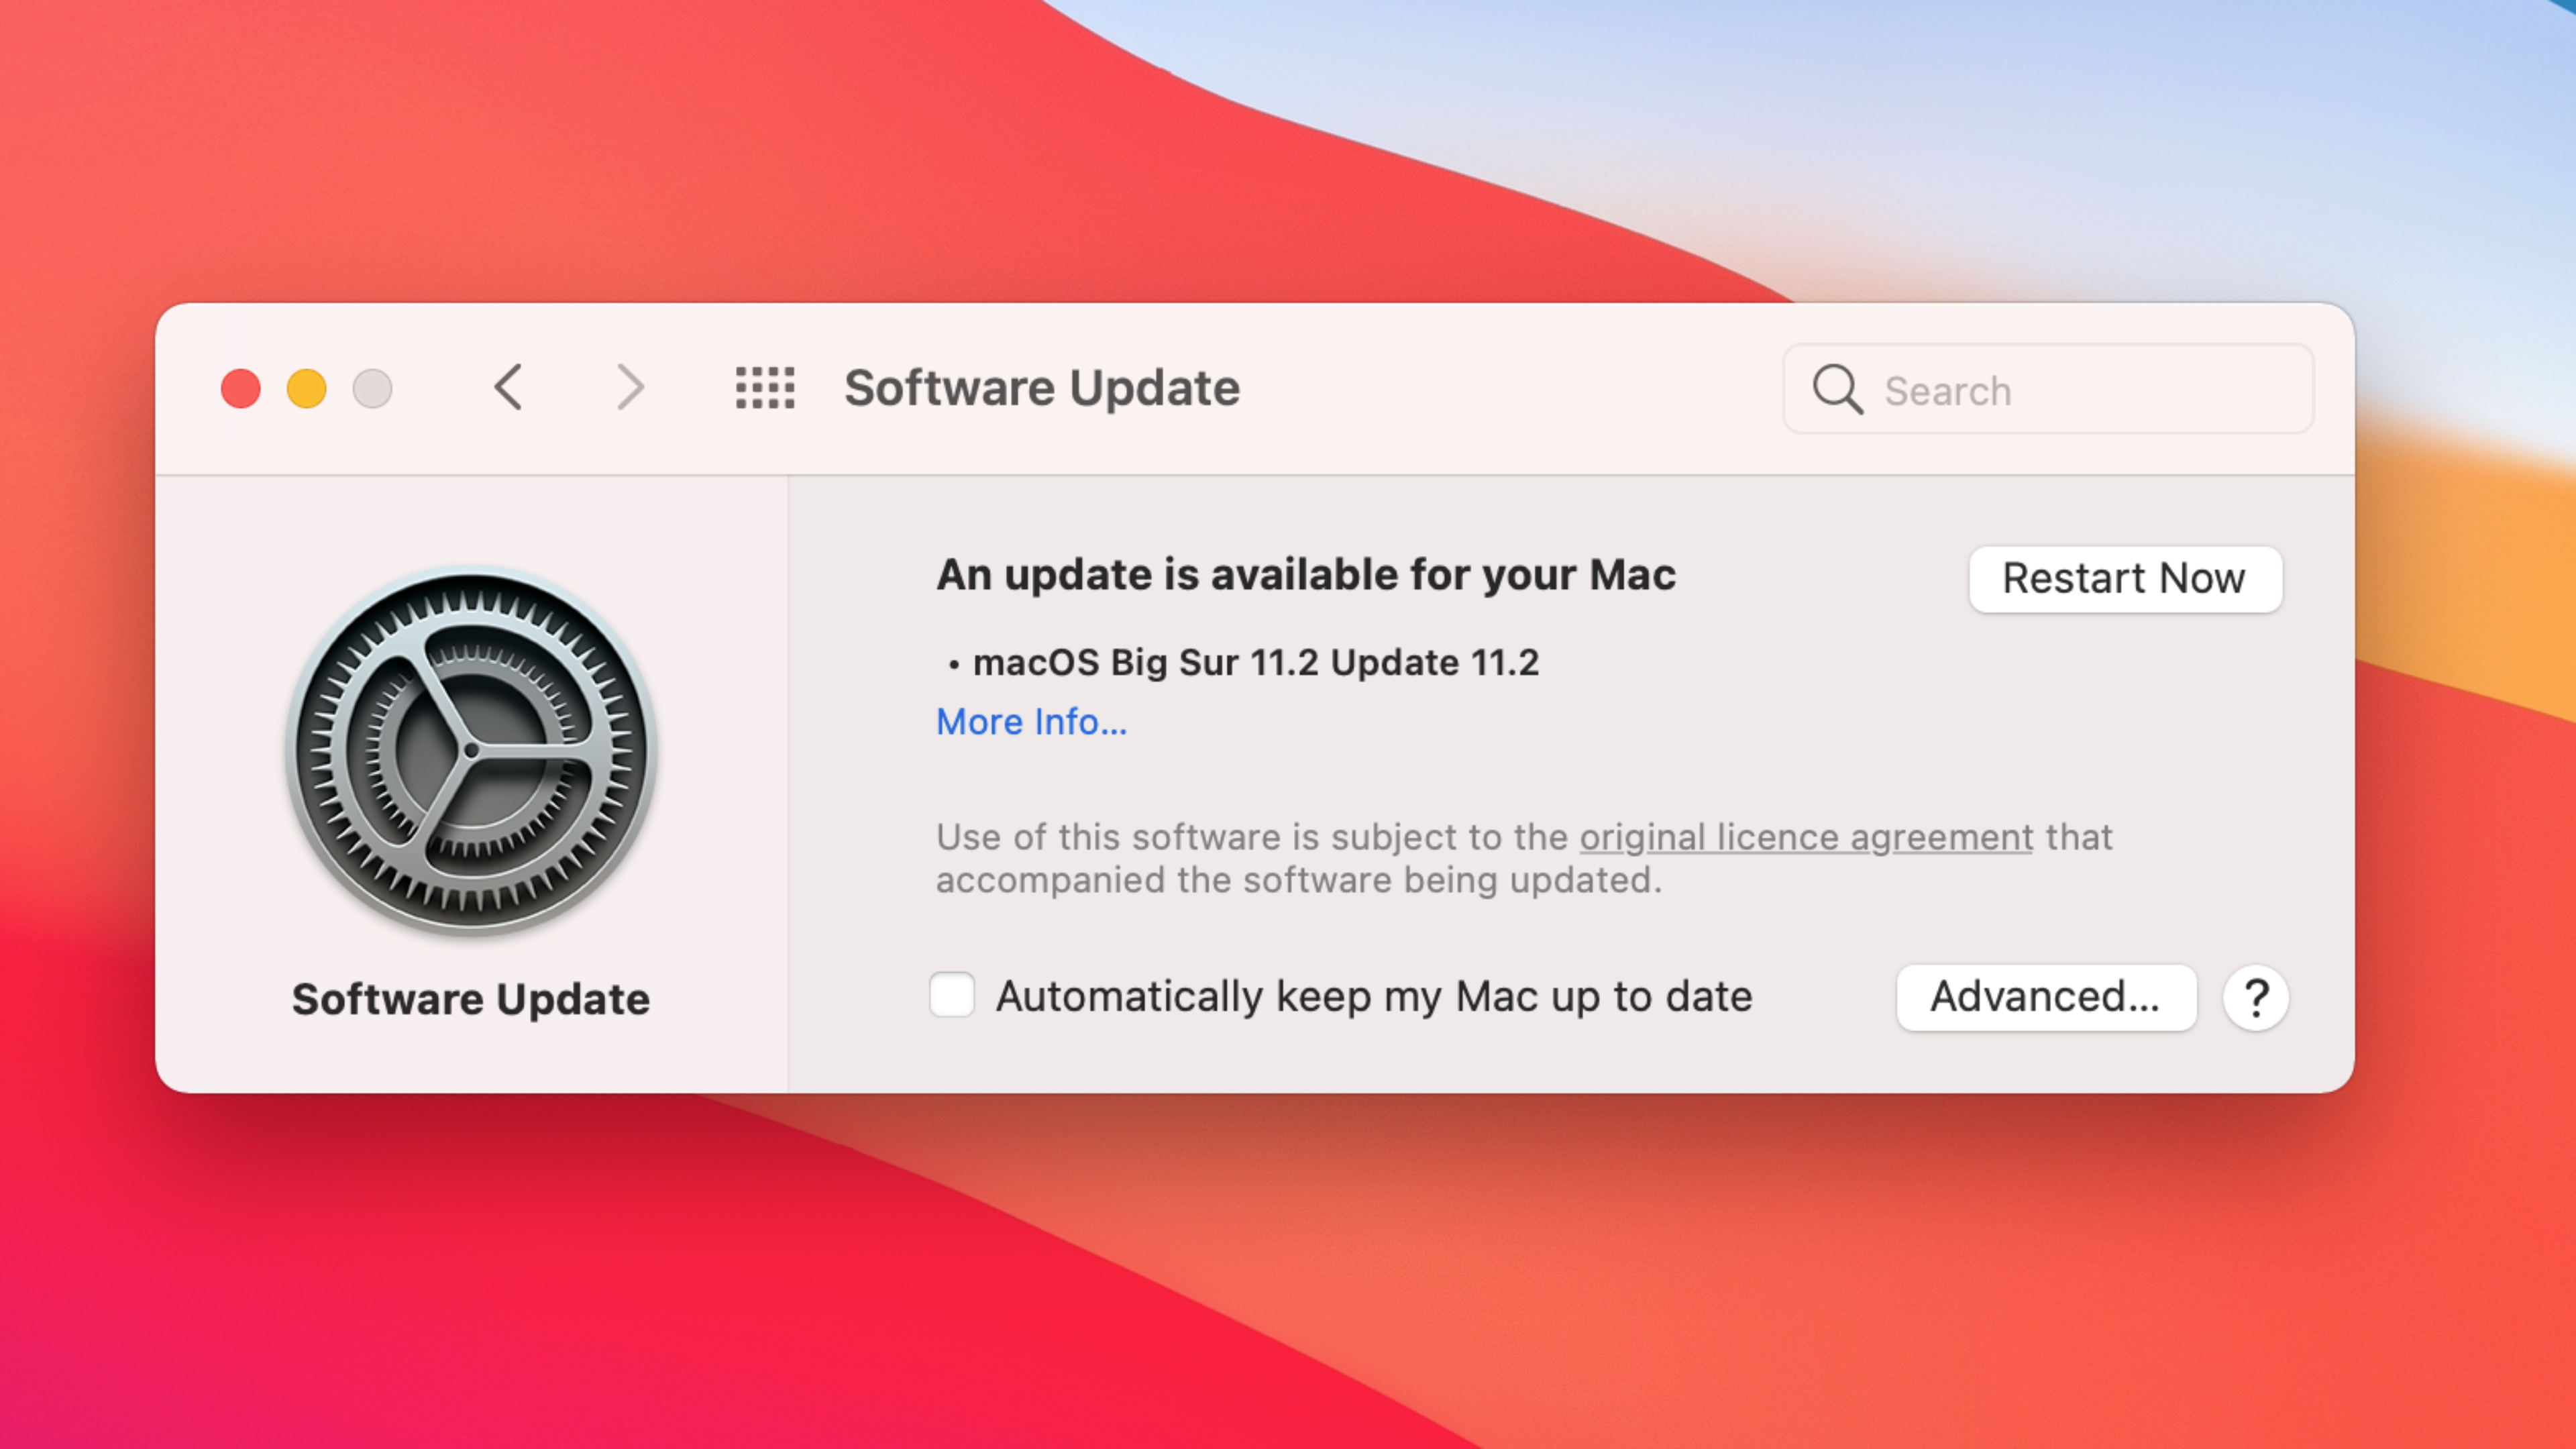 Apple Releases macOS Big Sur 11.2, Fixing Bluetooth Reliability and Other Issues